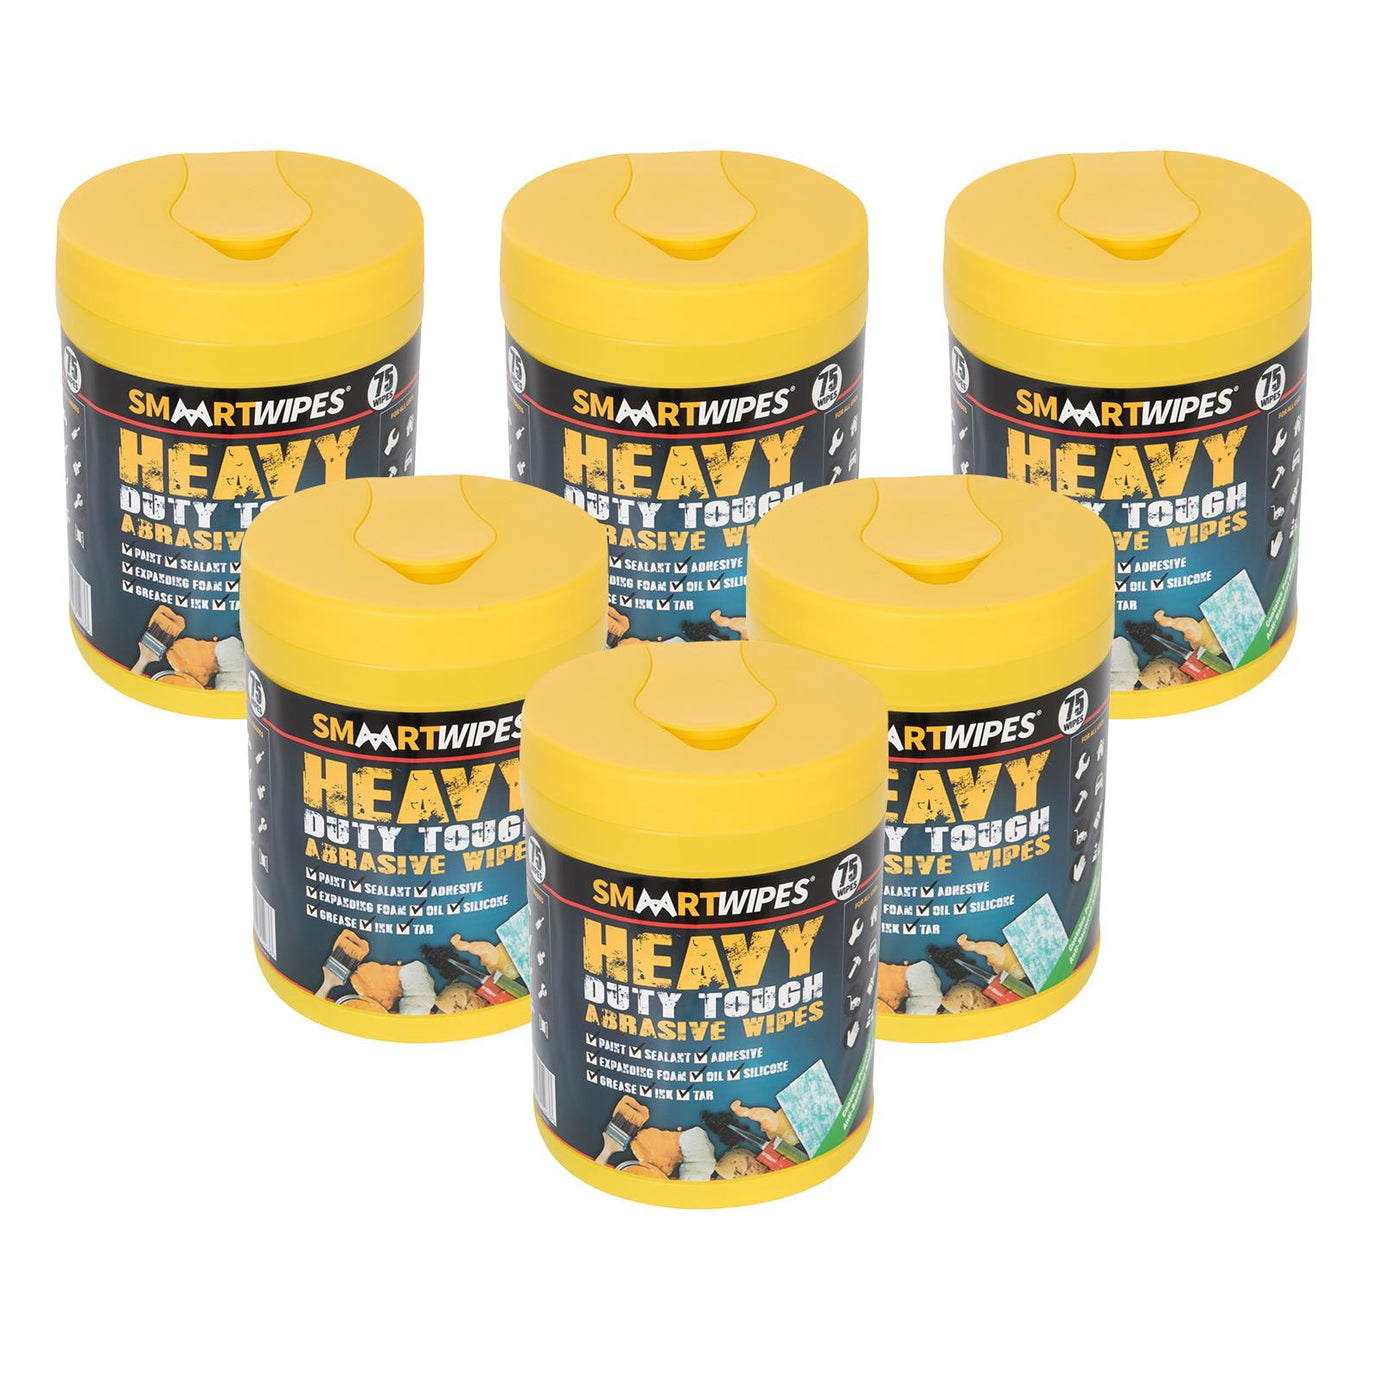 6 x Heavy Duty Tough Abrasive Wipes 75pk Bigger And Tougher Than Regular Wipes